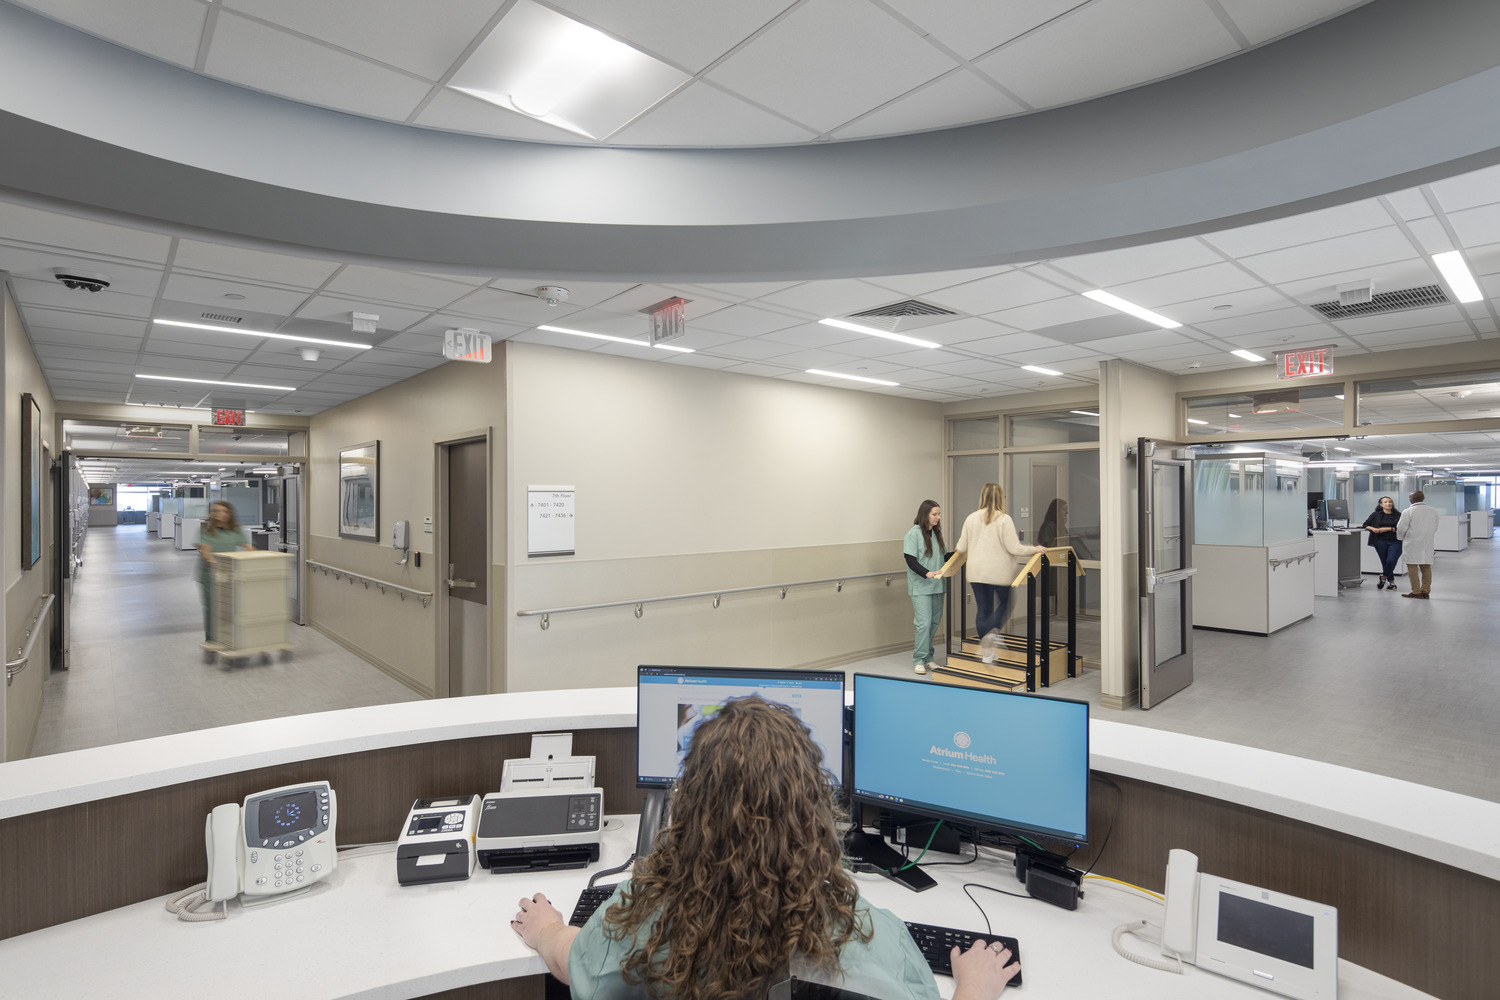 Atrium Health Pineville ICU desk and hallway. A nurse can be seen at the desk and another in the hall helping a patient on stairs.